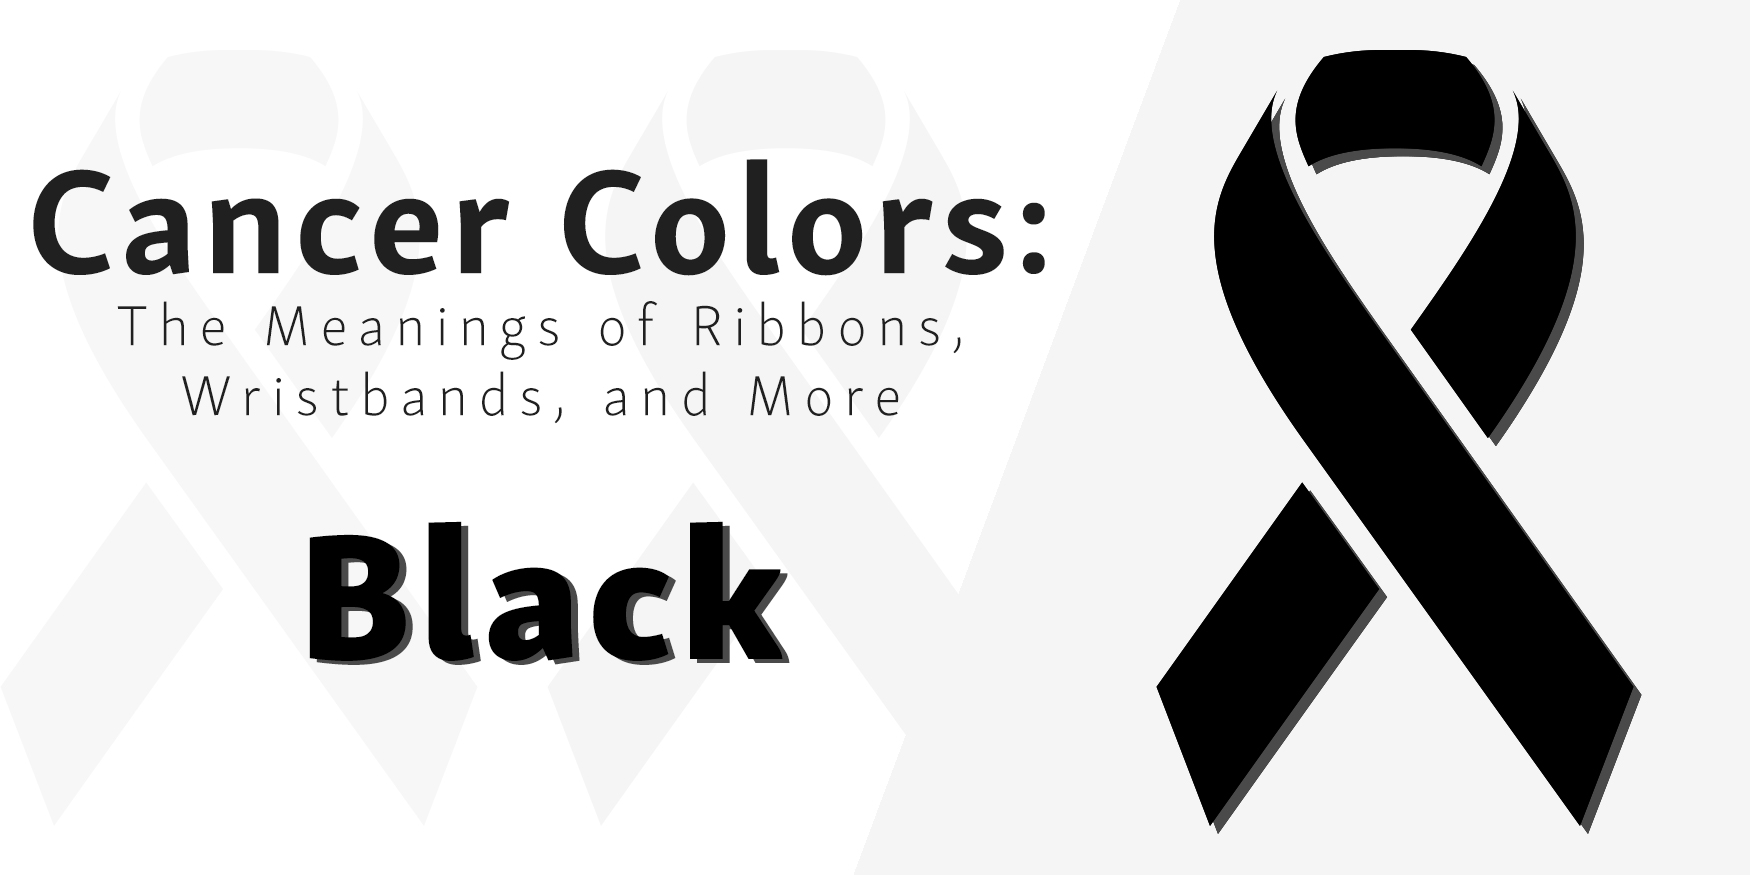 Support Black: The Skin Cancer Ribbon